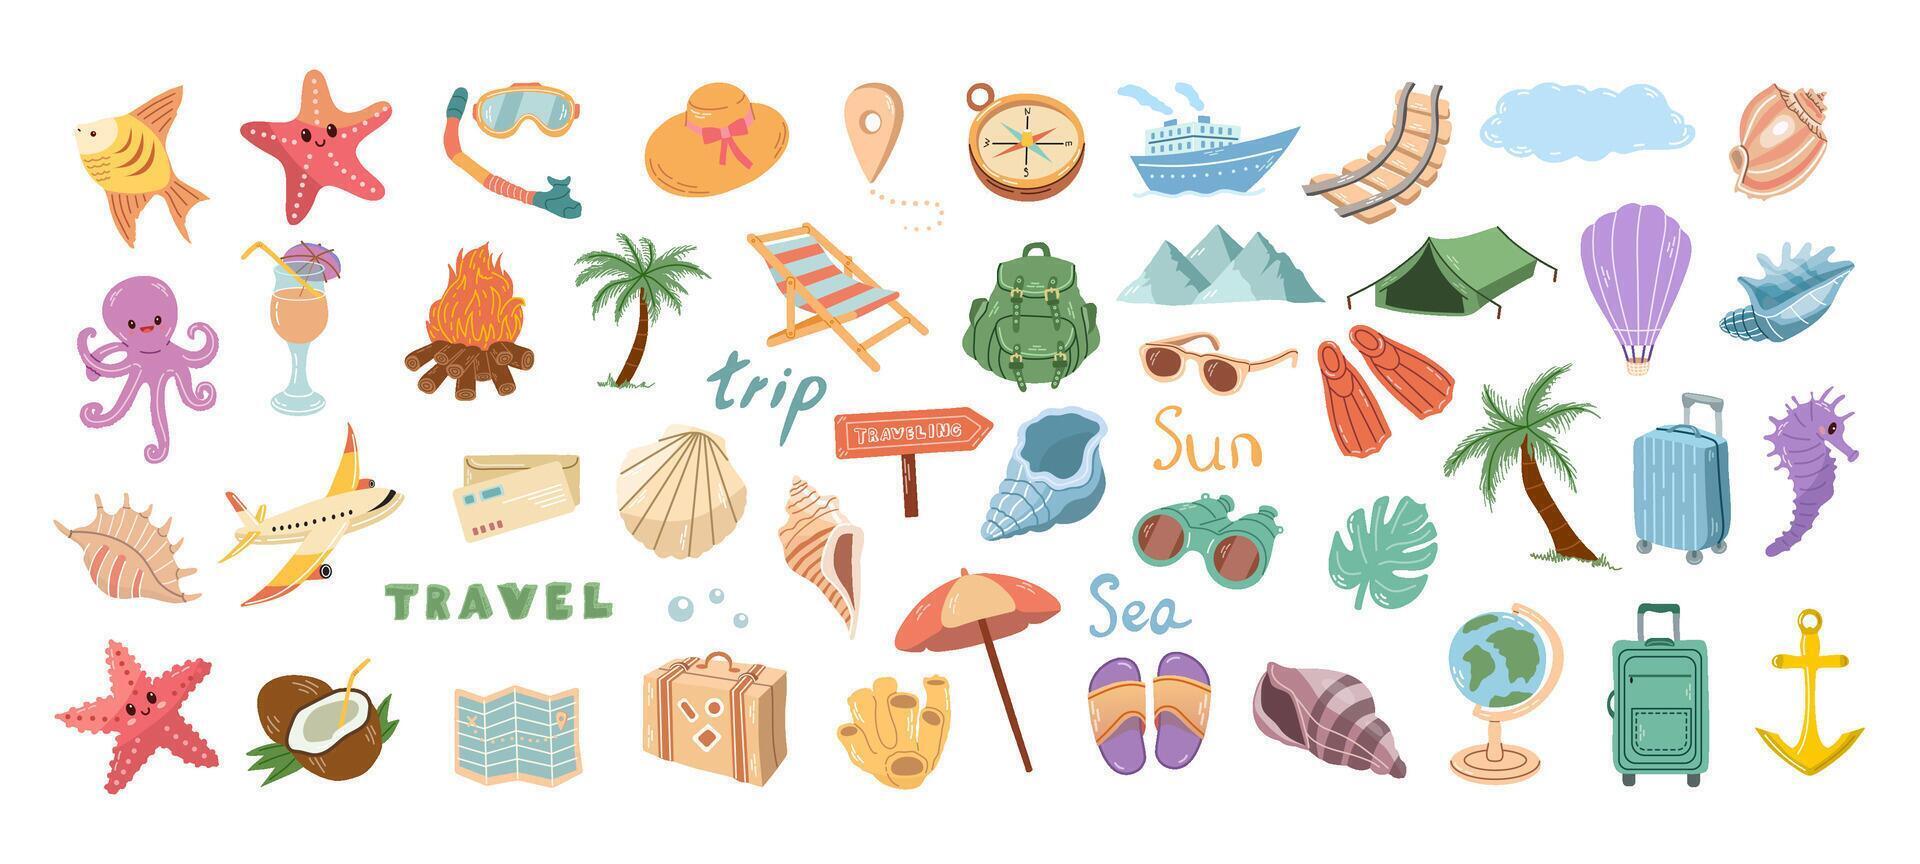 A cute set of hand-drawn travel icons. Badges for tourism and camping adventures. A clipart with travel elements, bags, transport, camera, map, palm tree, shells. vector